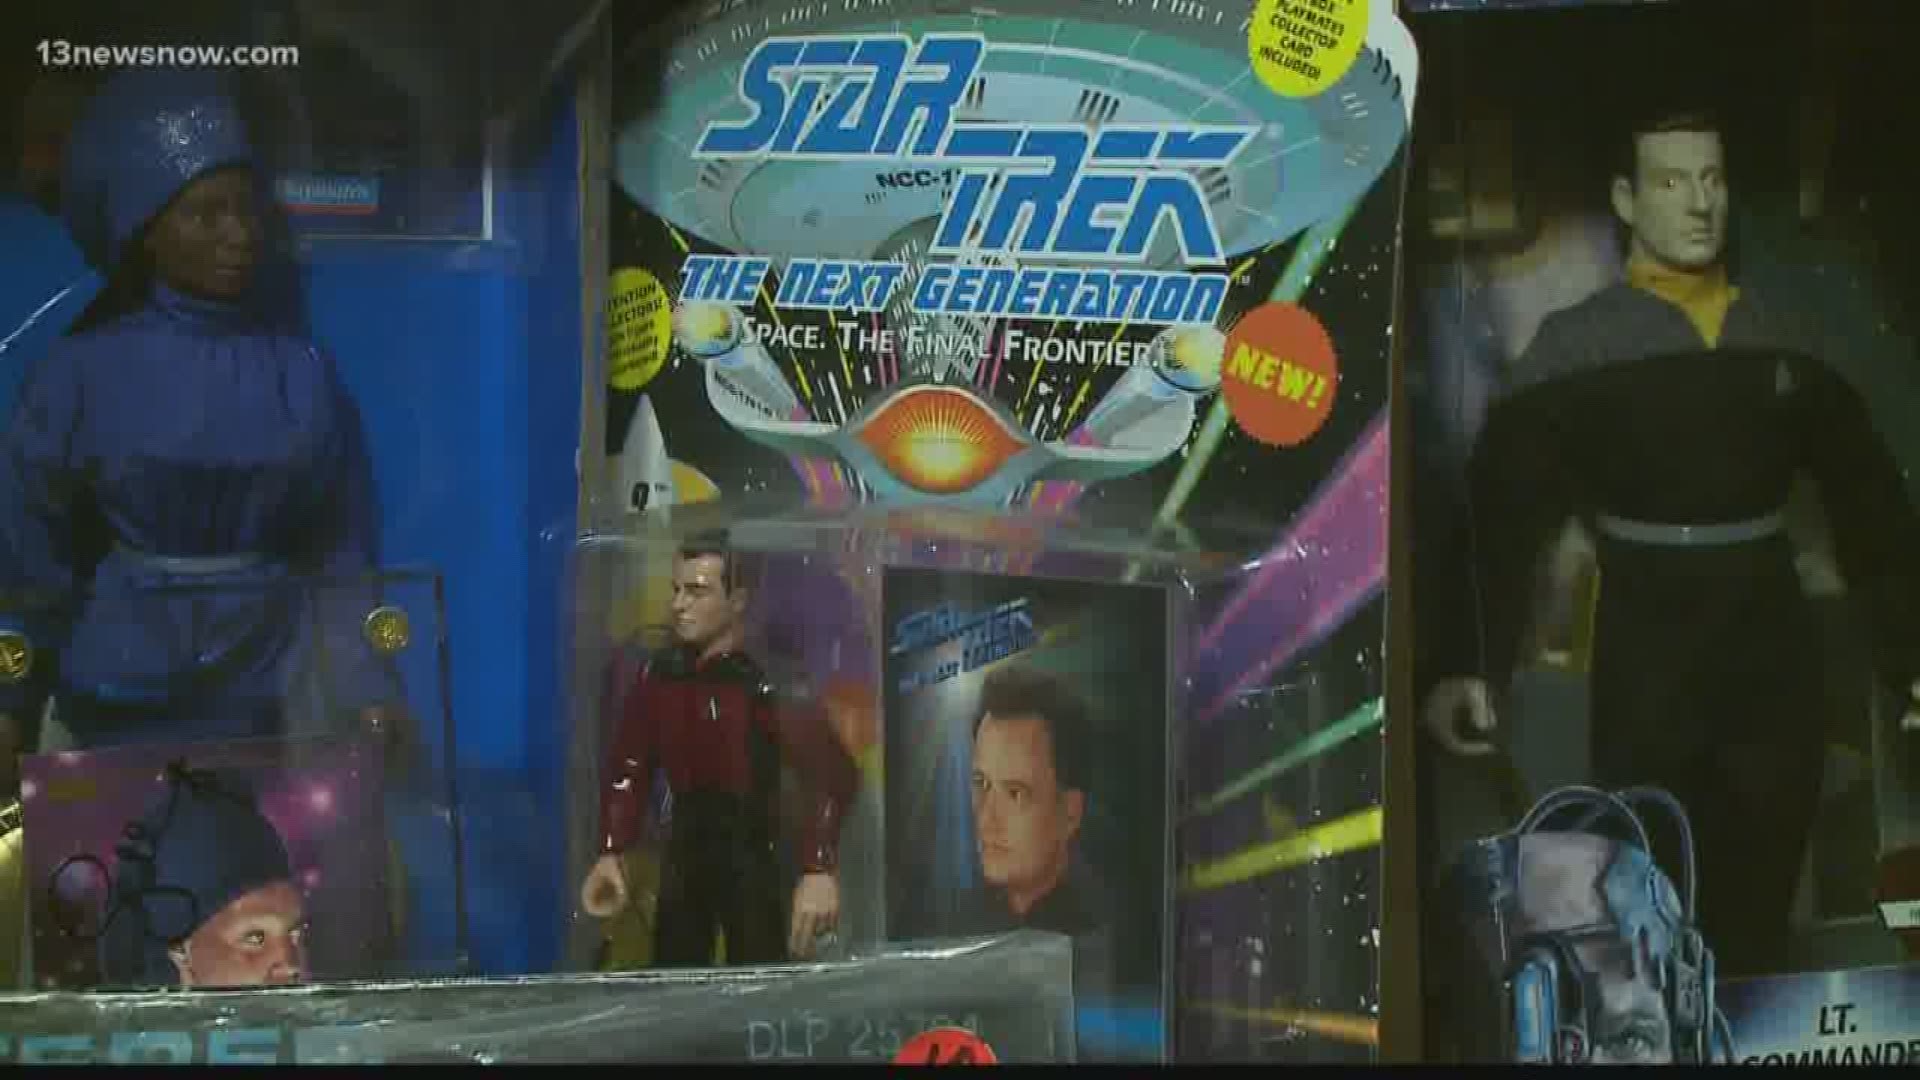 'Star Trek' fans in the area have been a part of a club for decades.